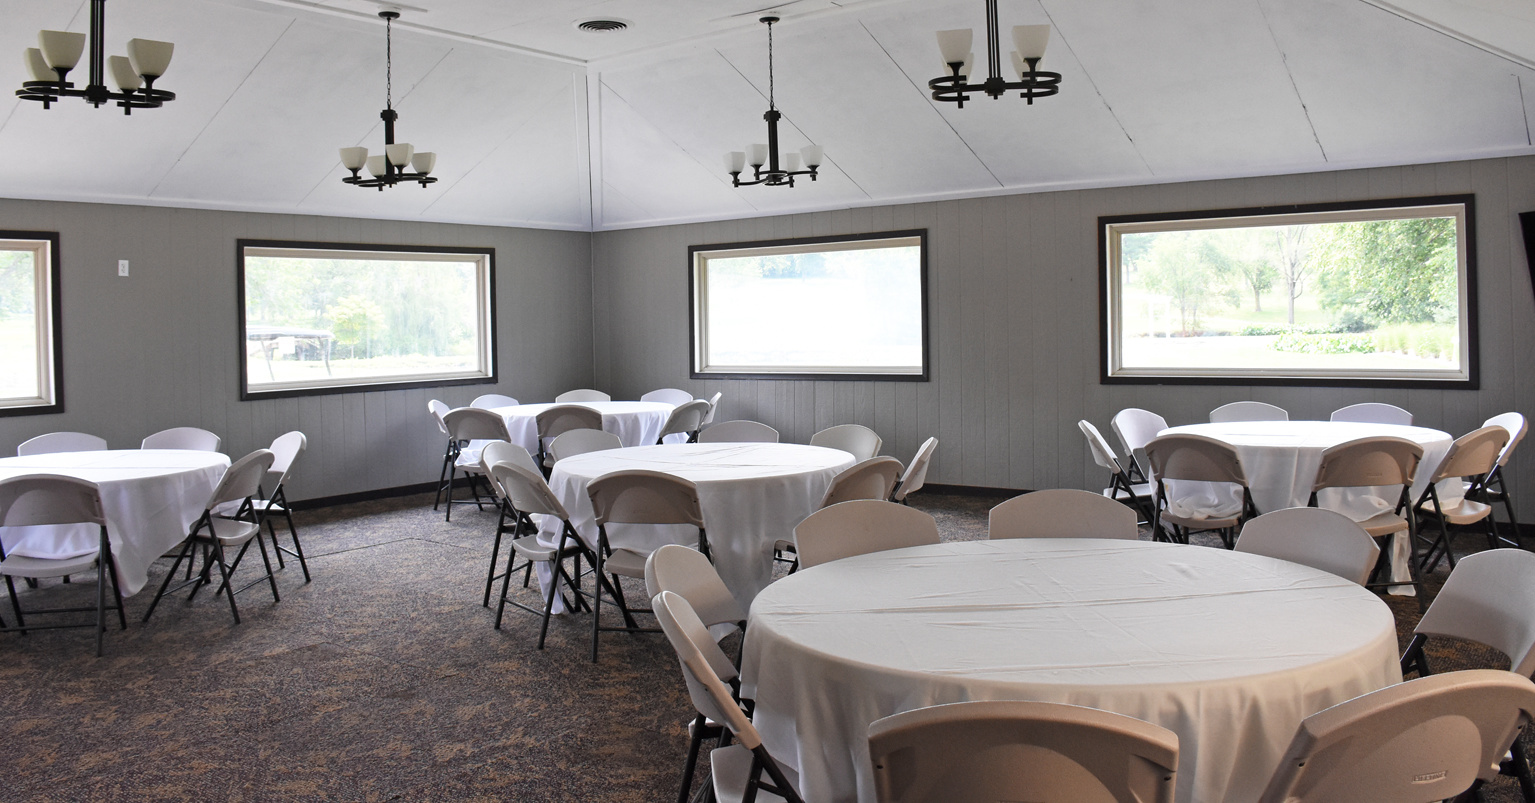 Our Golfers Lounge can seat up to 60 people